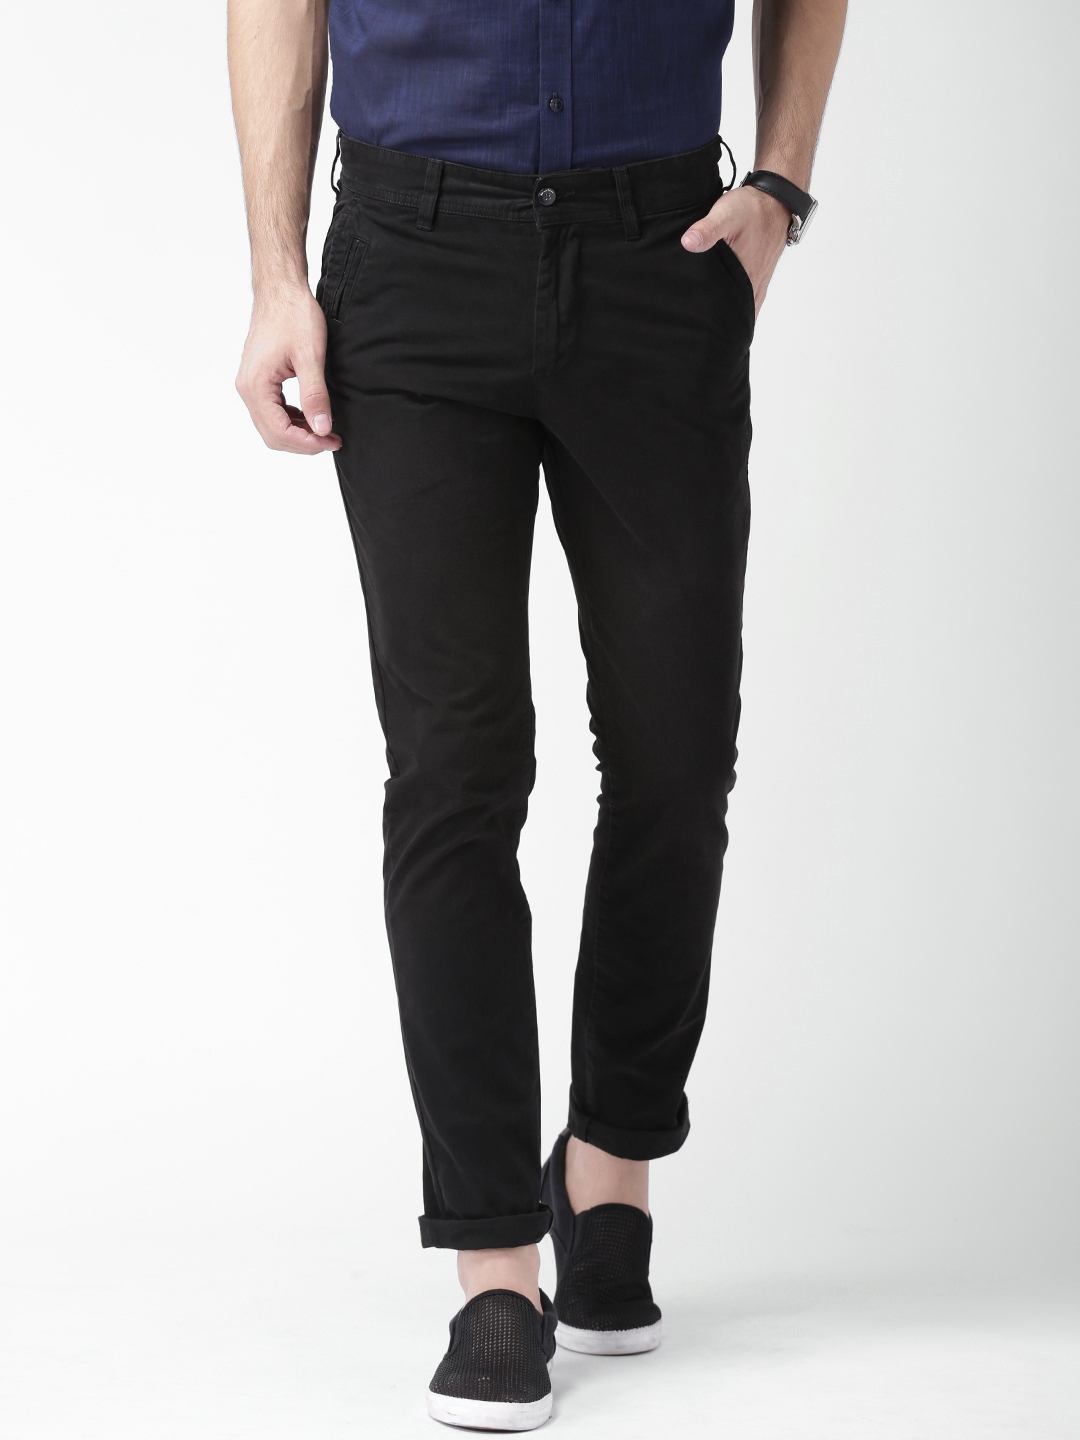 Buy Mast & Harbour Black Trousers - Trousers for Men 1191709 | Myntra